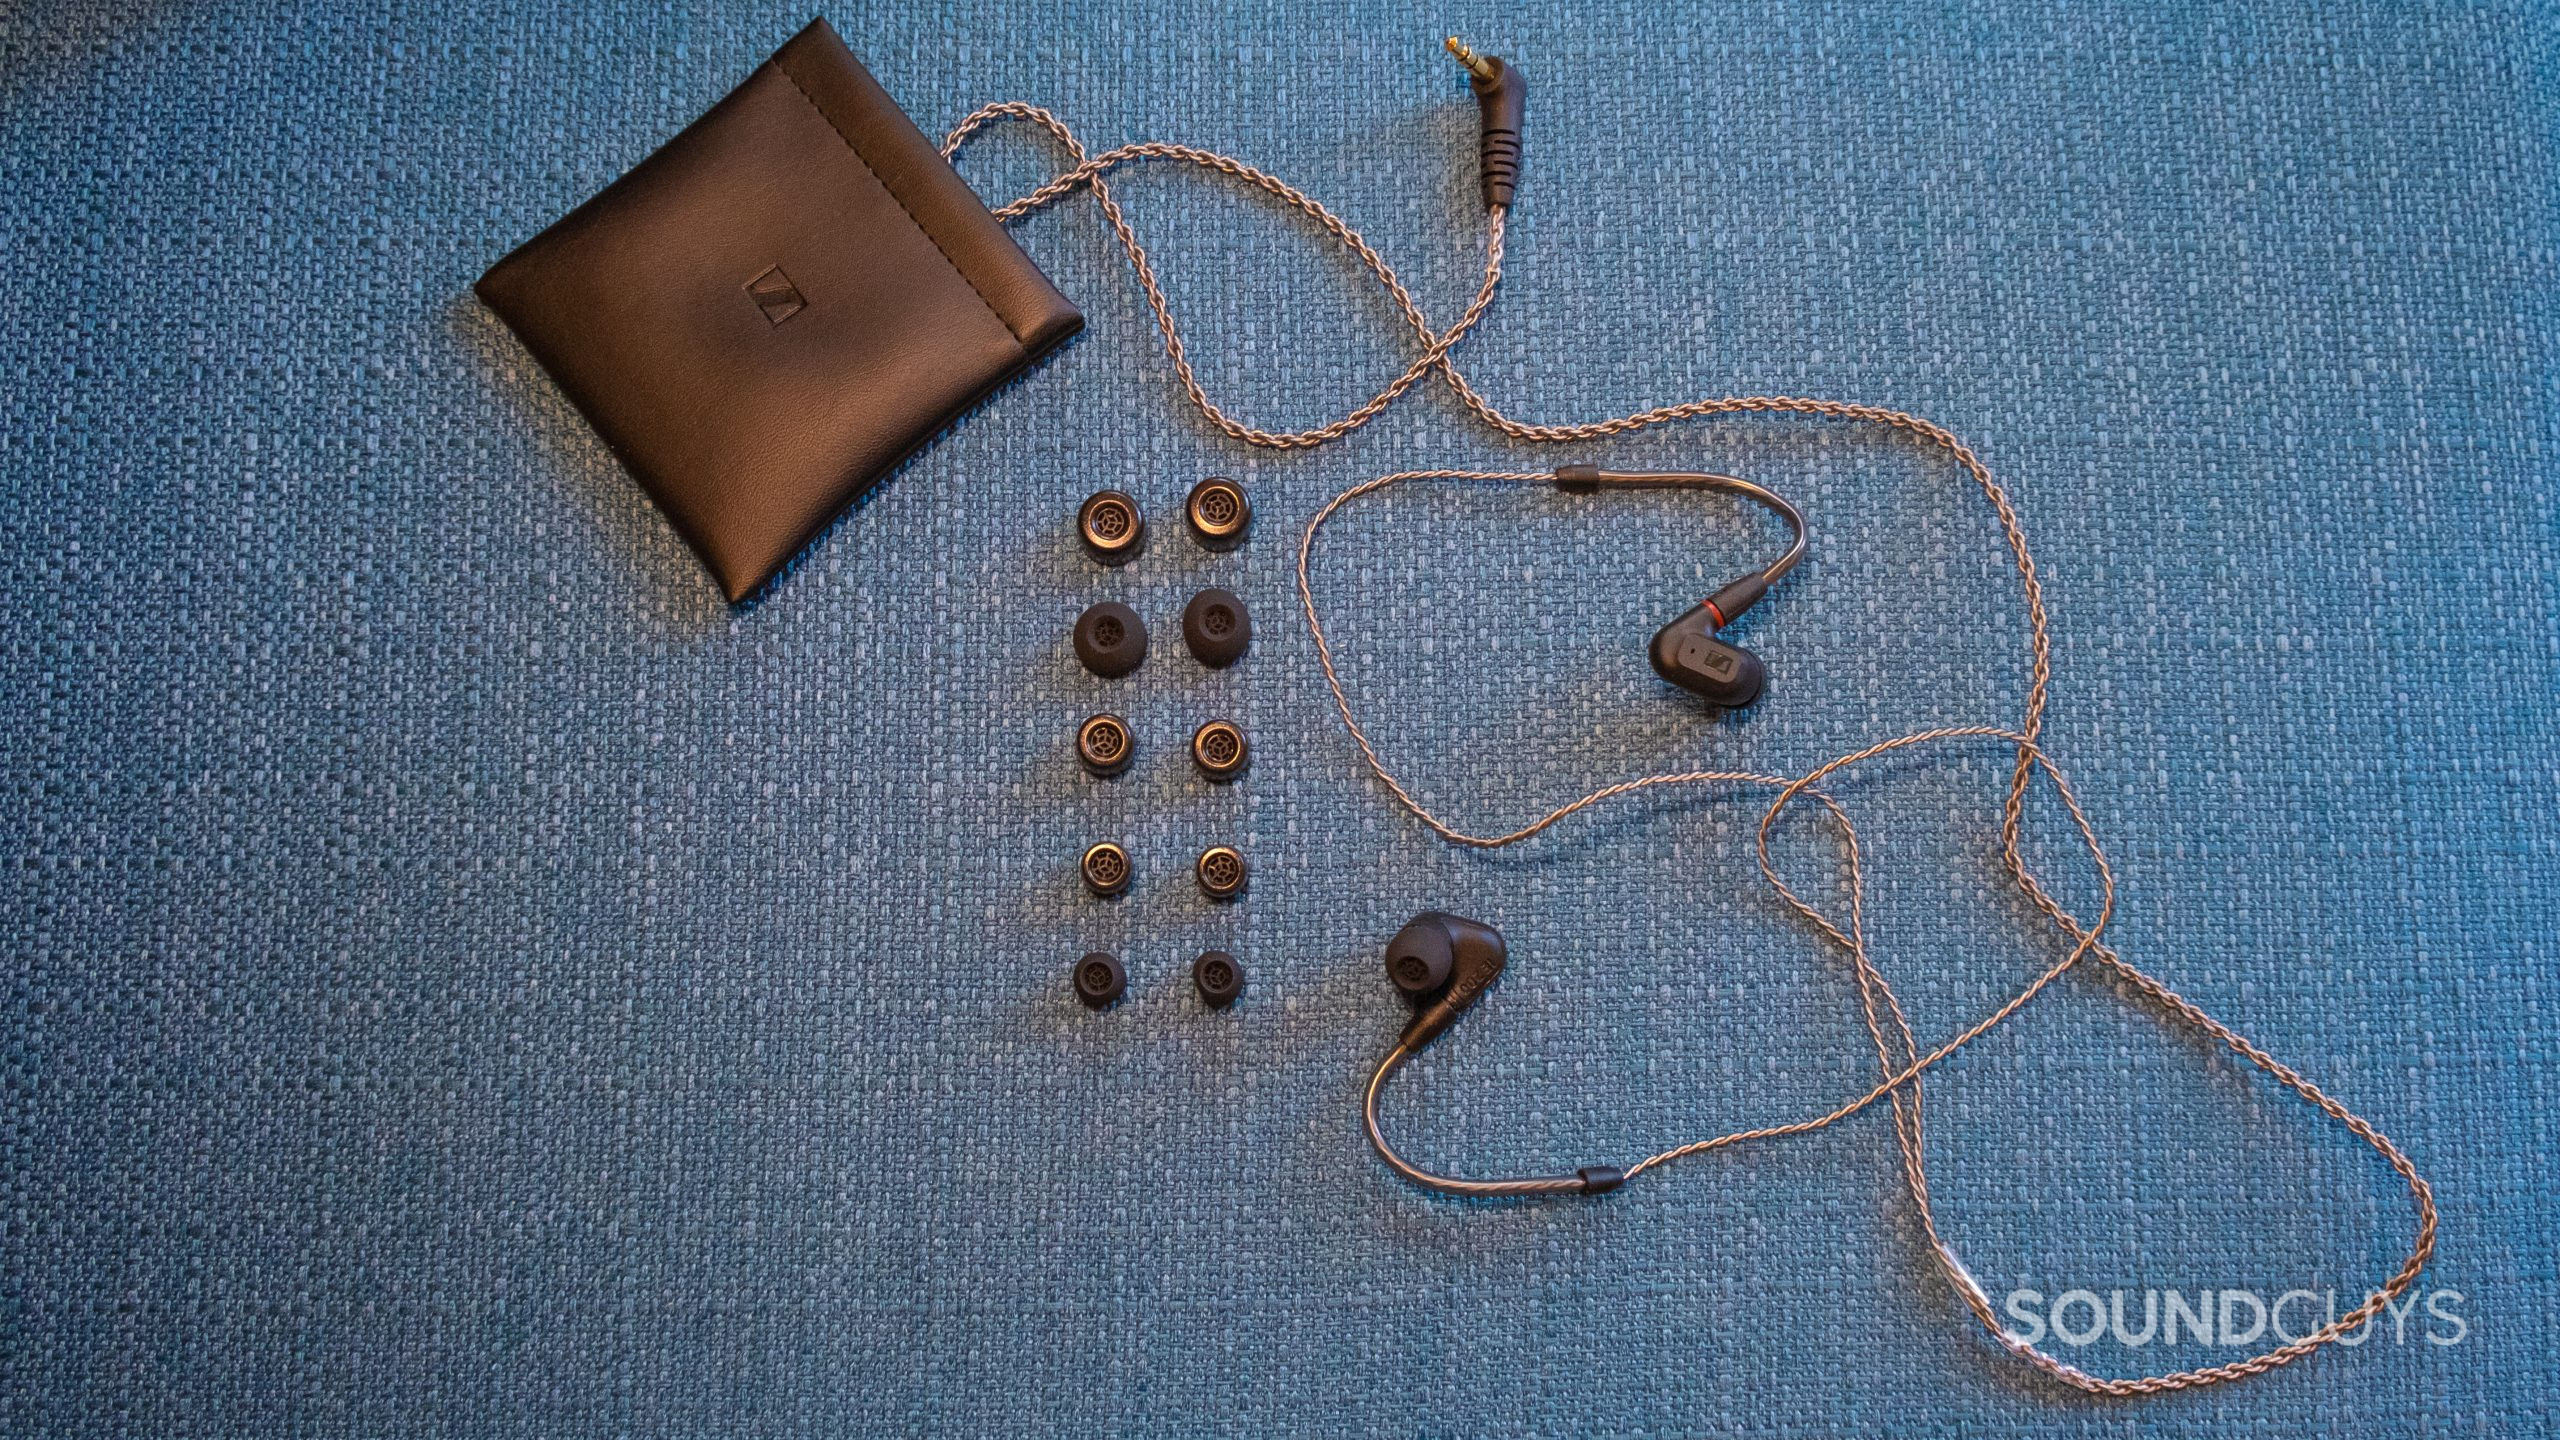 On a teal fabric bench surface the Sennheiser IE 200 is shown with its ear tips and pouch.